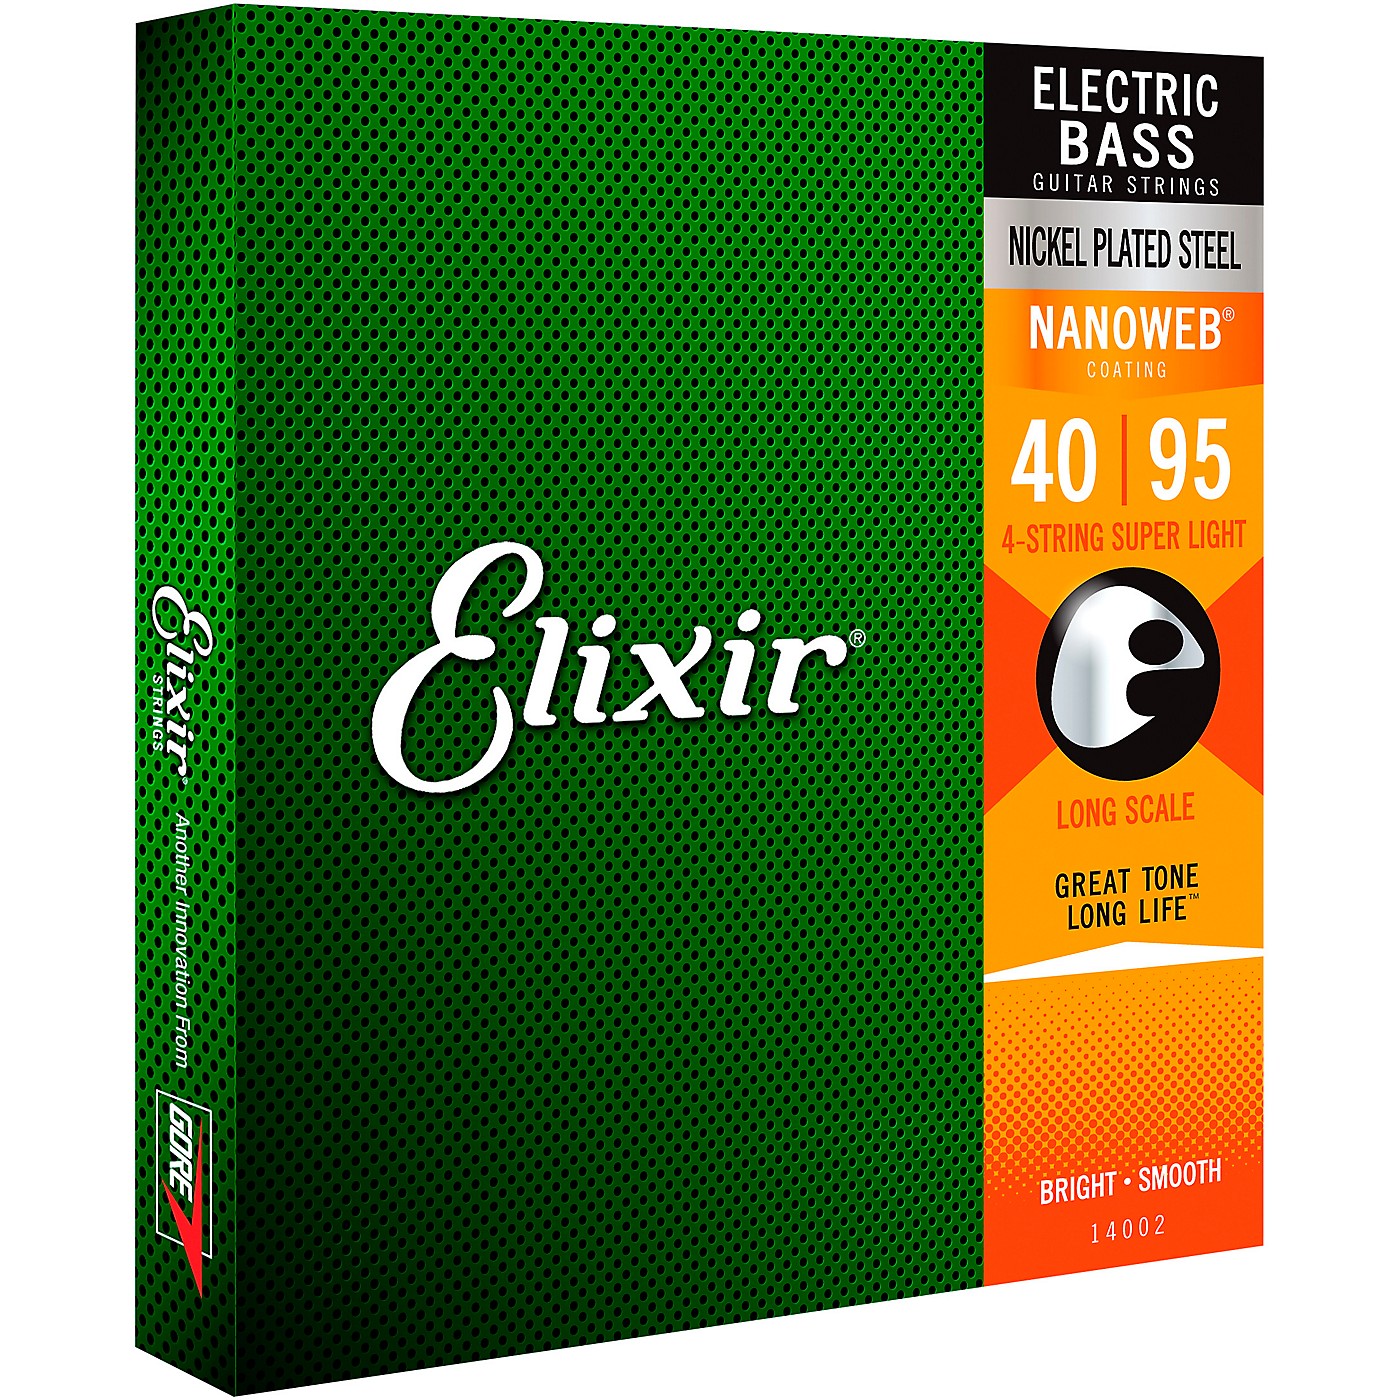 Elixir Nickel-Plated Steel 4-String Bass Strings with NANOWEB Coating, Long Scale, Super Light (.040-.095) thumbnail